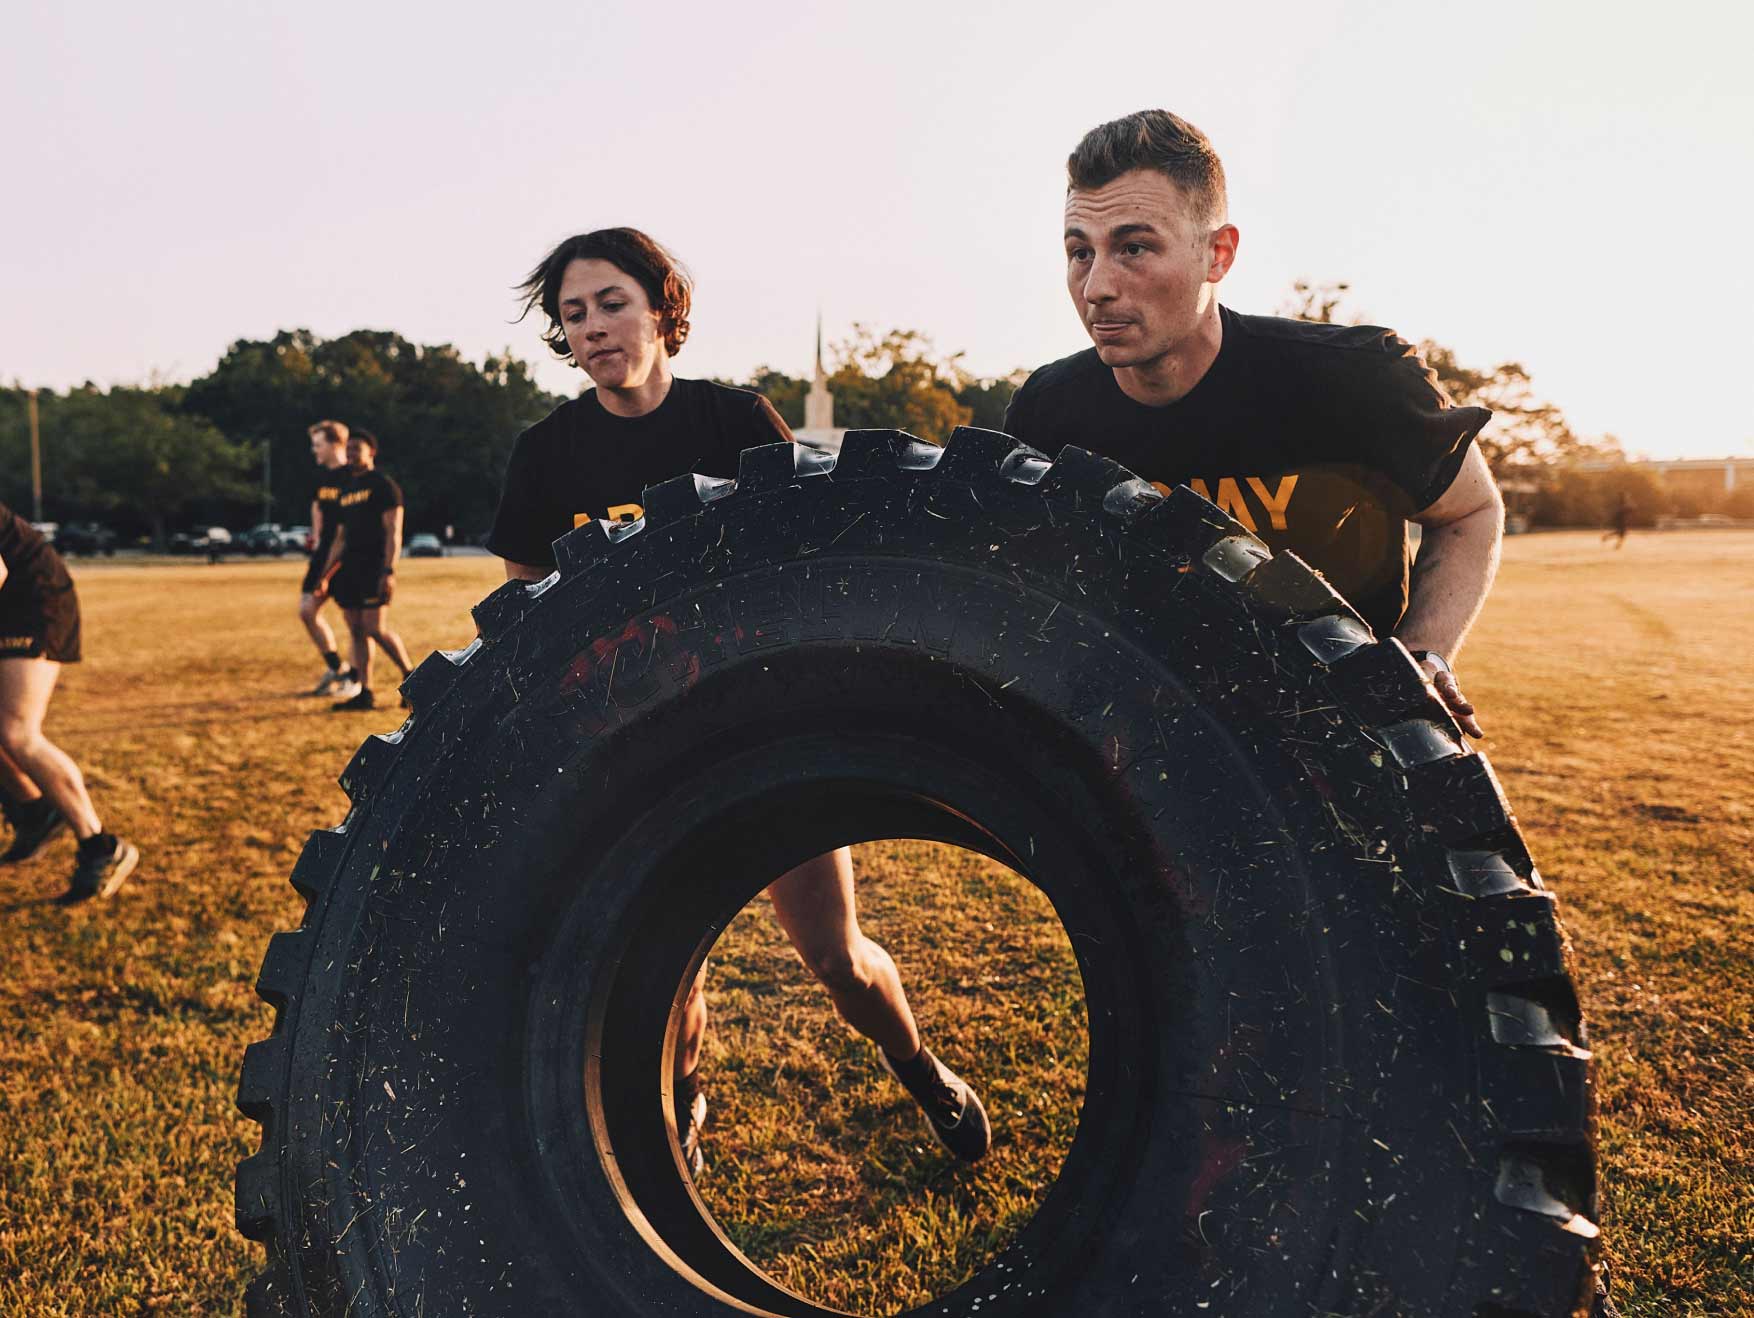 A male Soldier in an Army tee shirt pushing a tractor tire in a field as part of an exercise